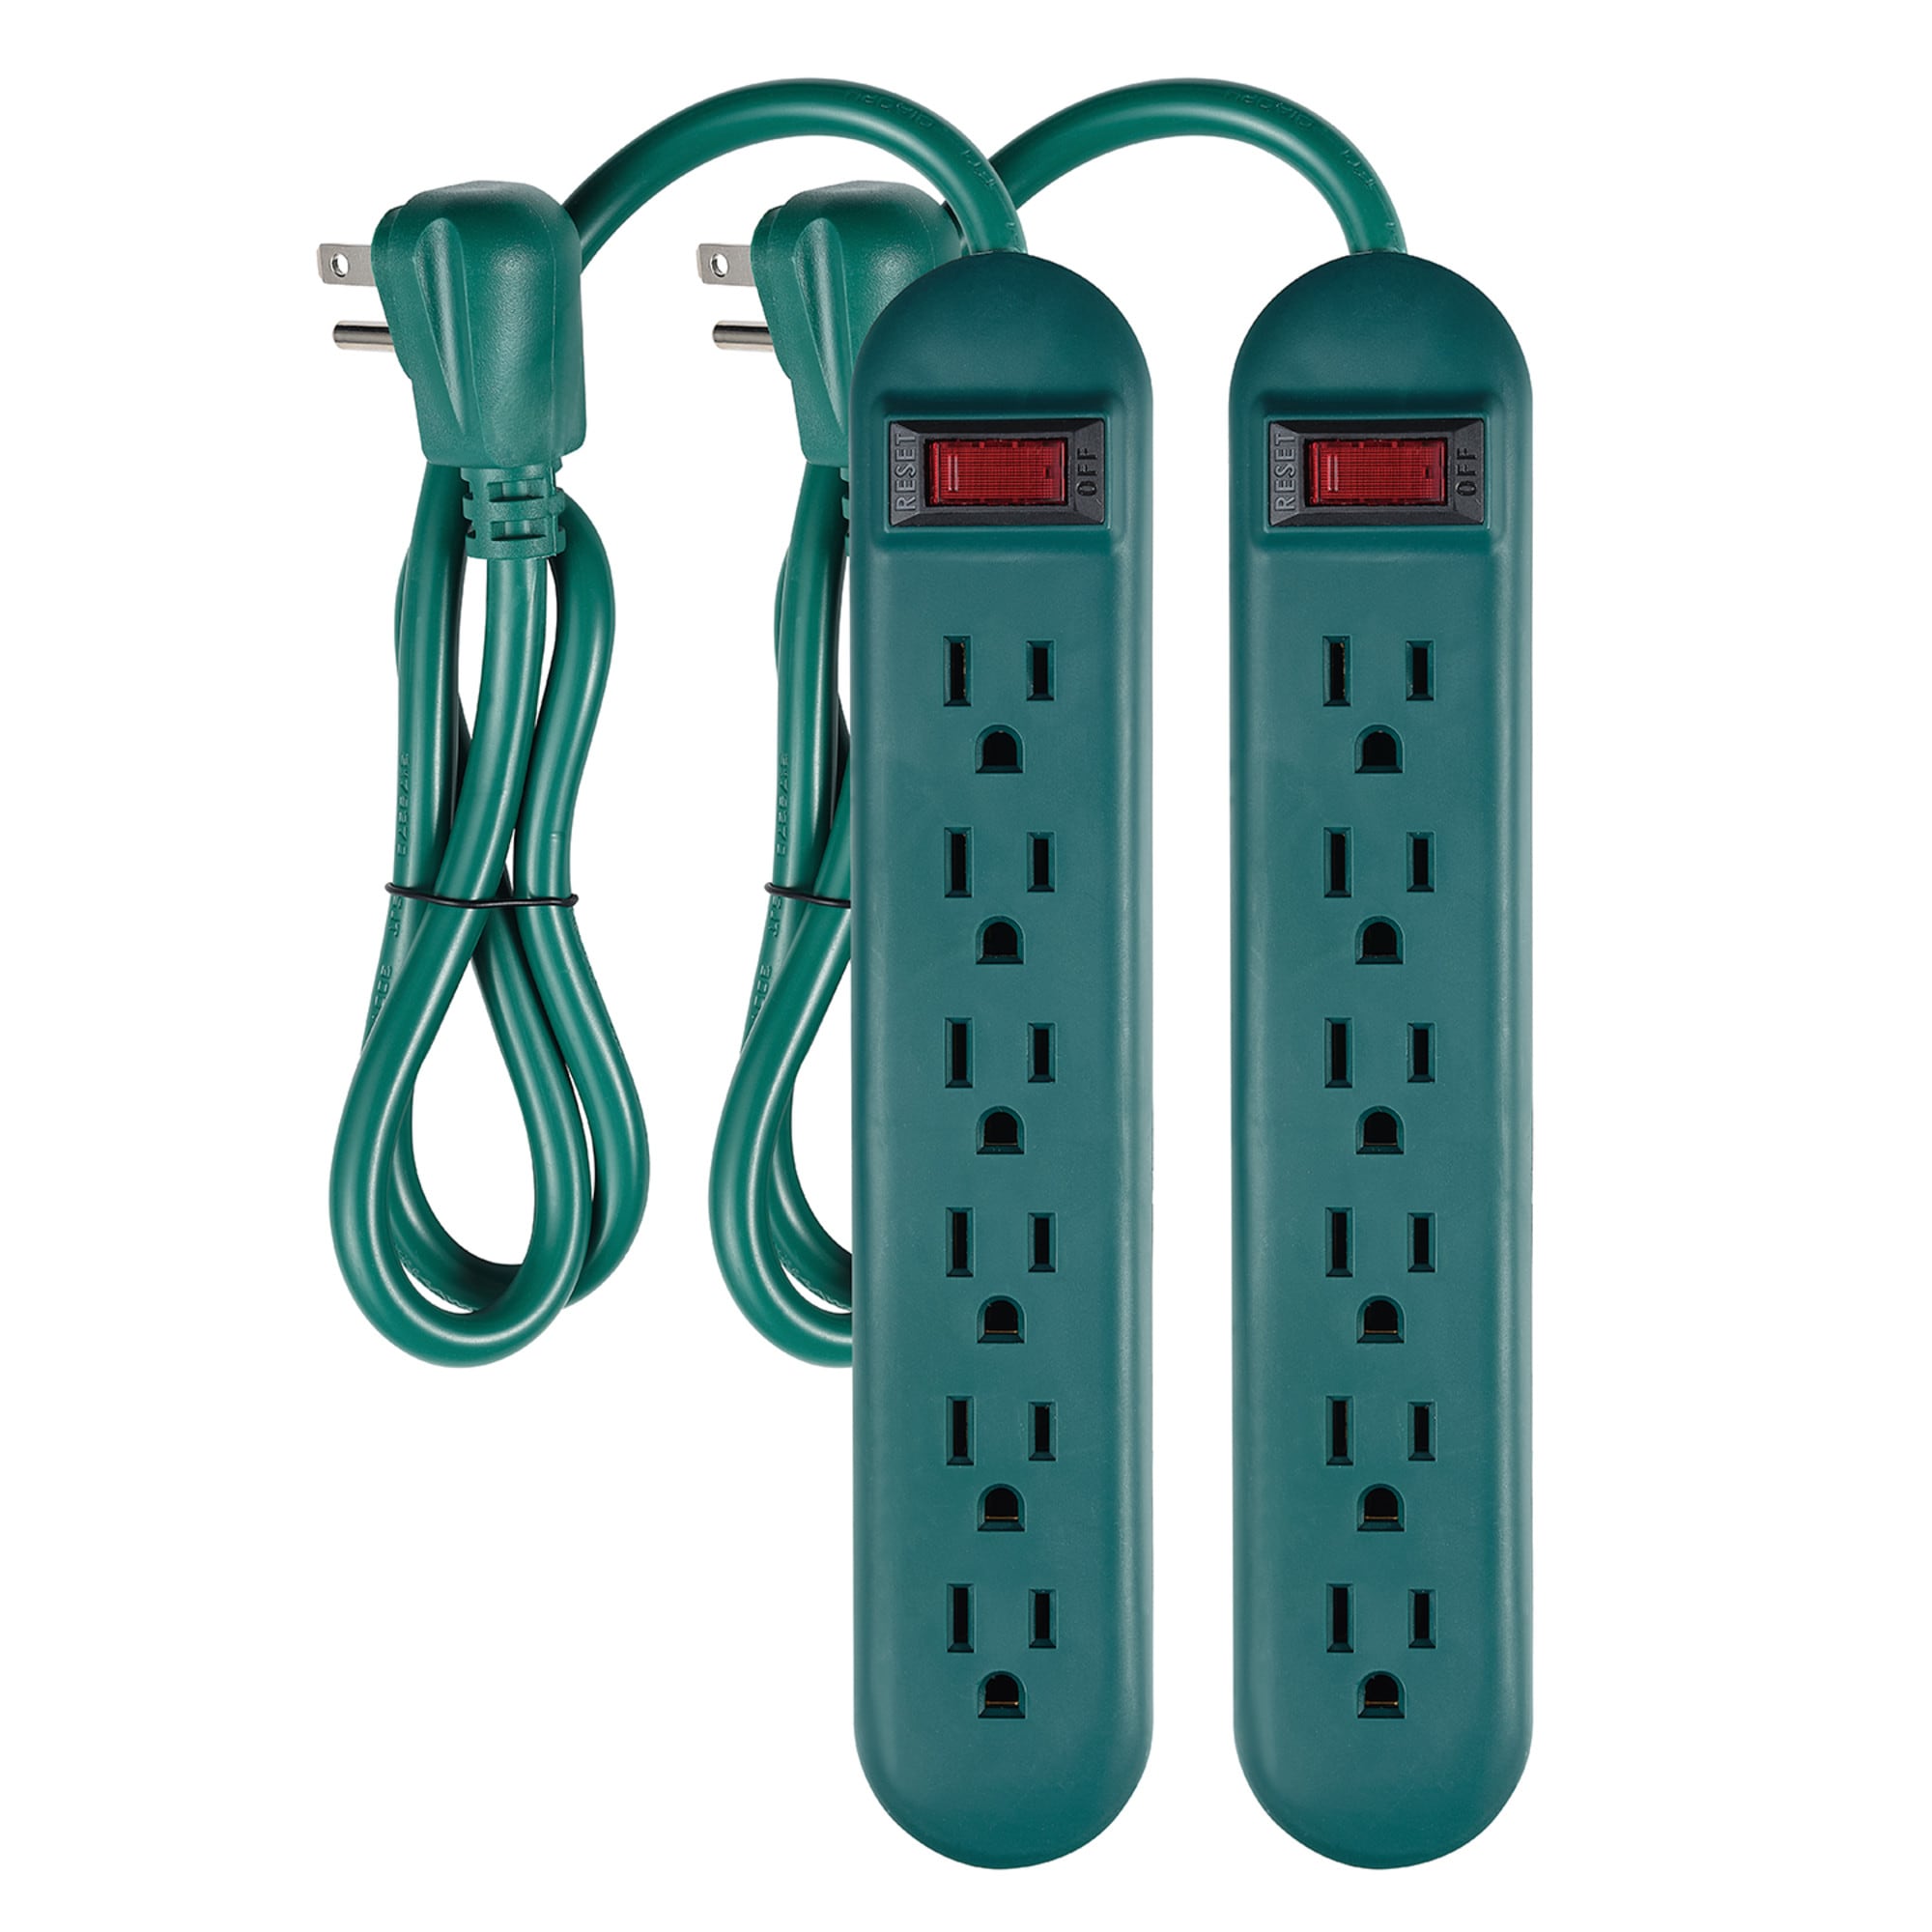 Power Strip Cover (2 pack)